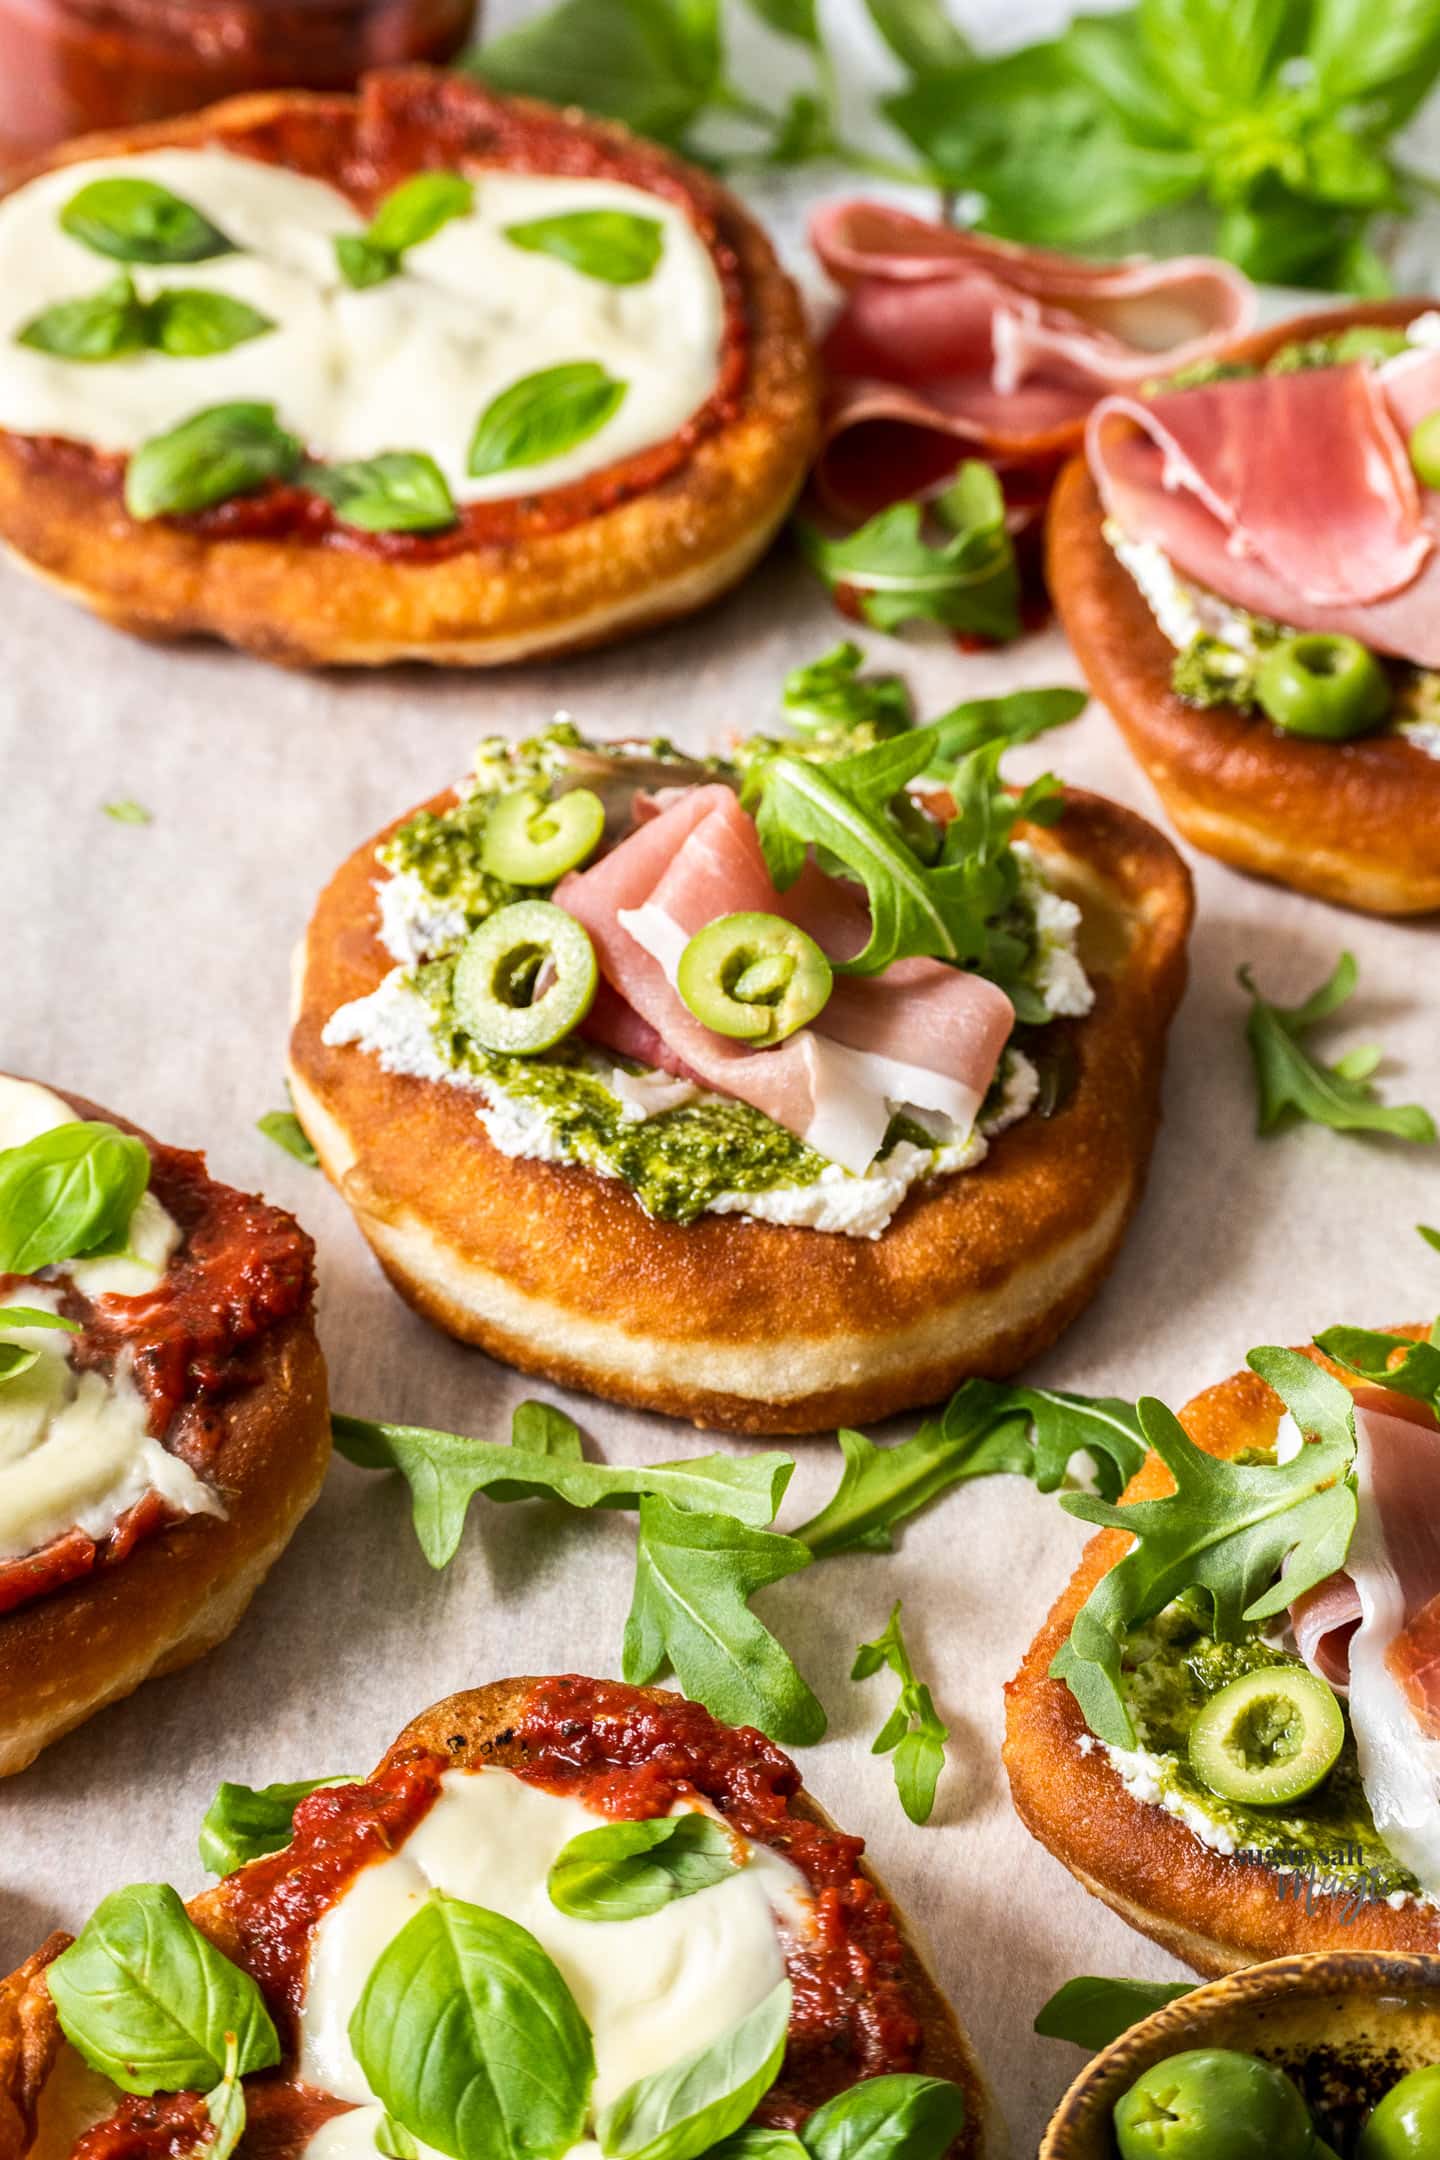 A fried pizza topped with pesto and prosciutto.